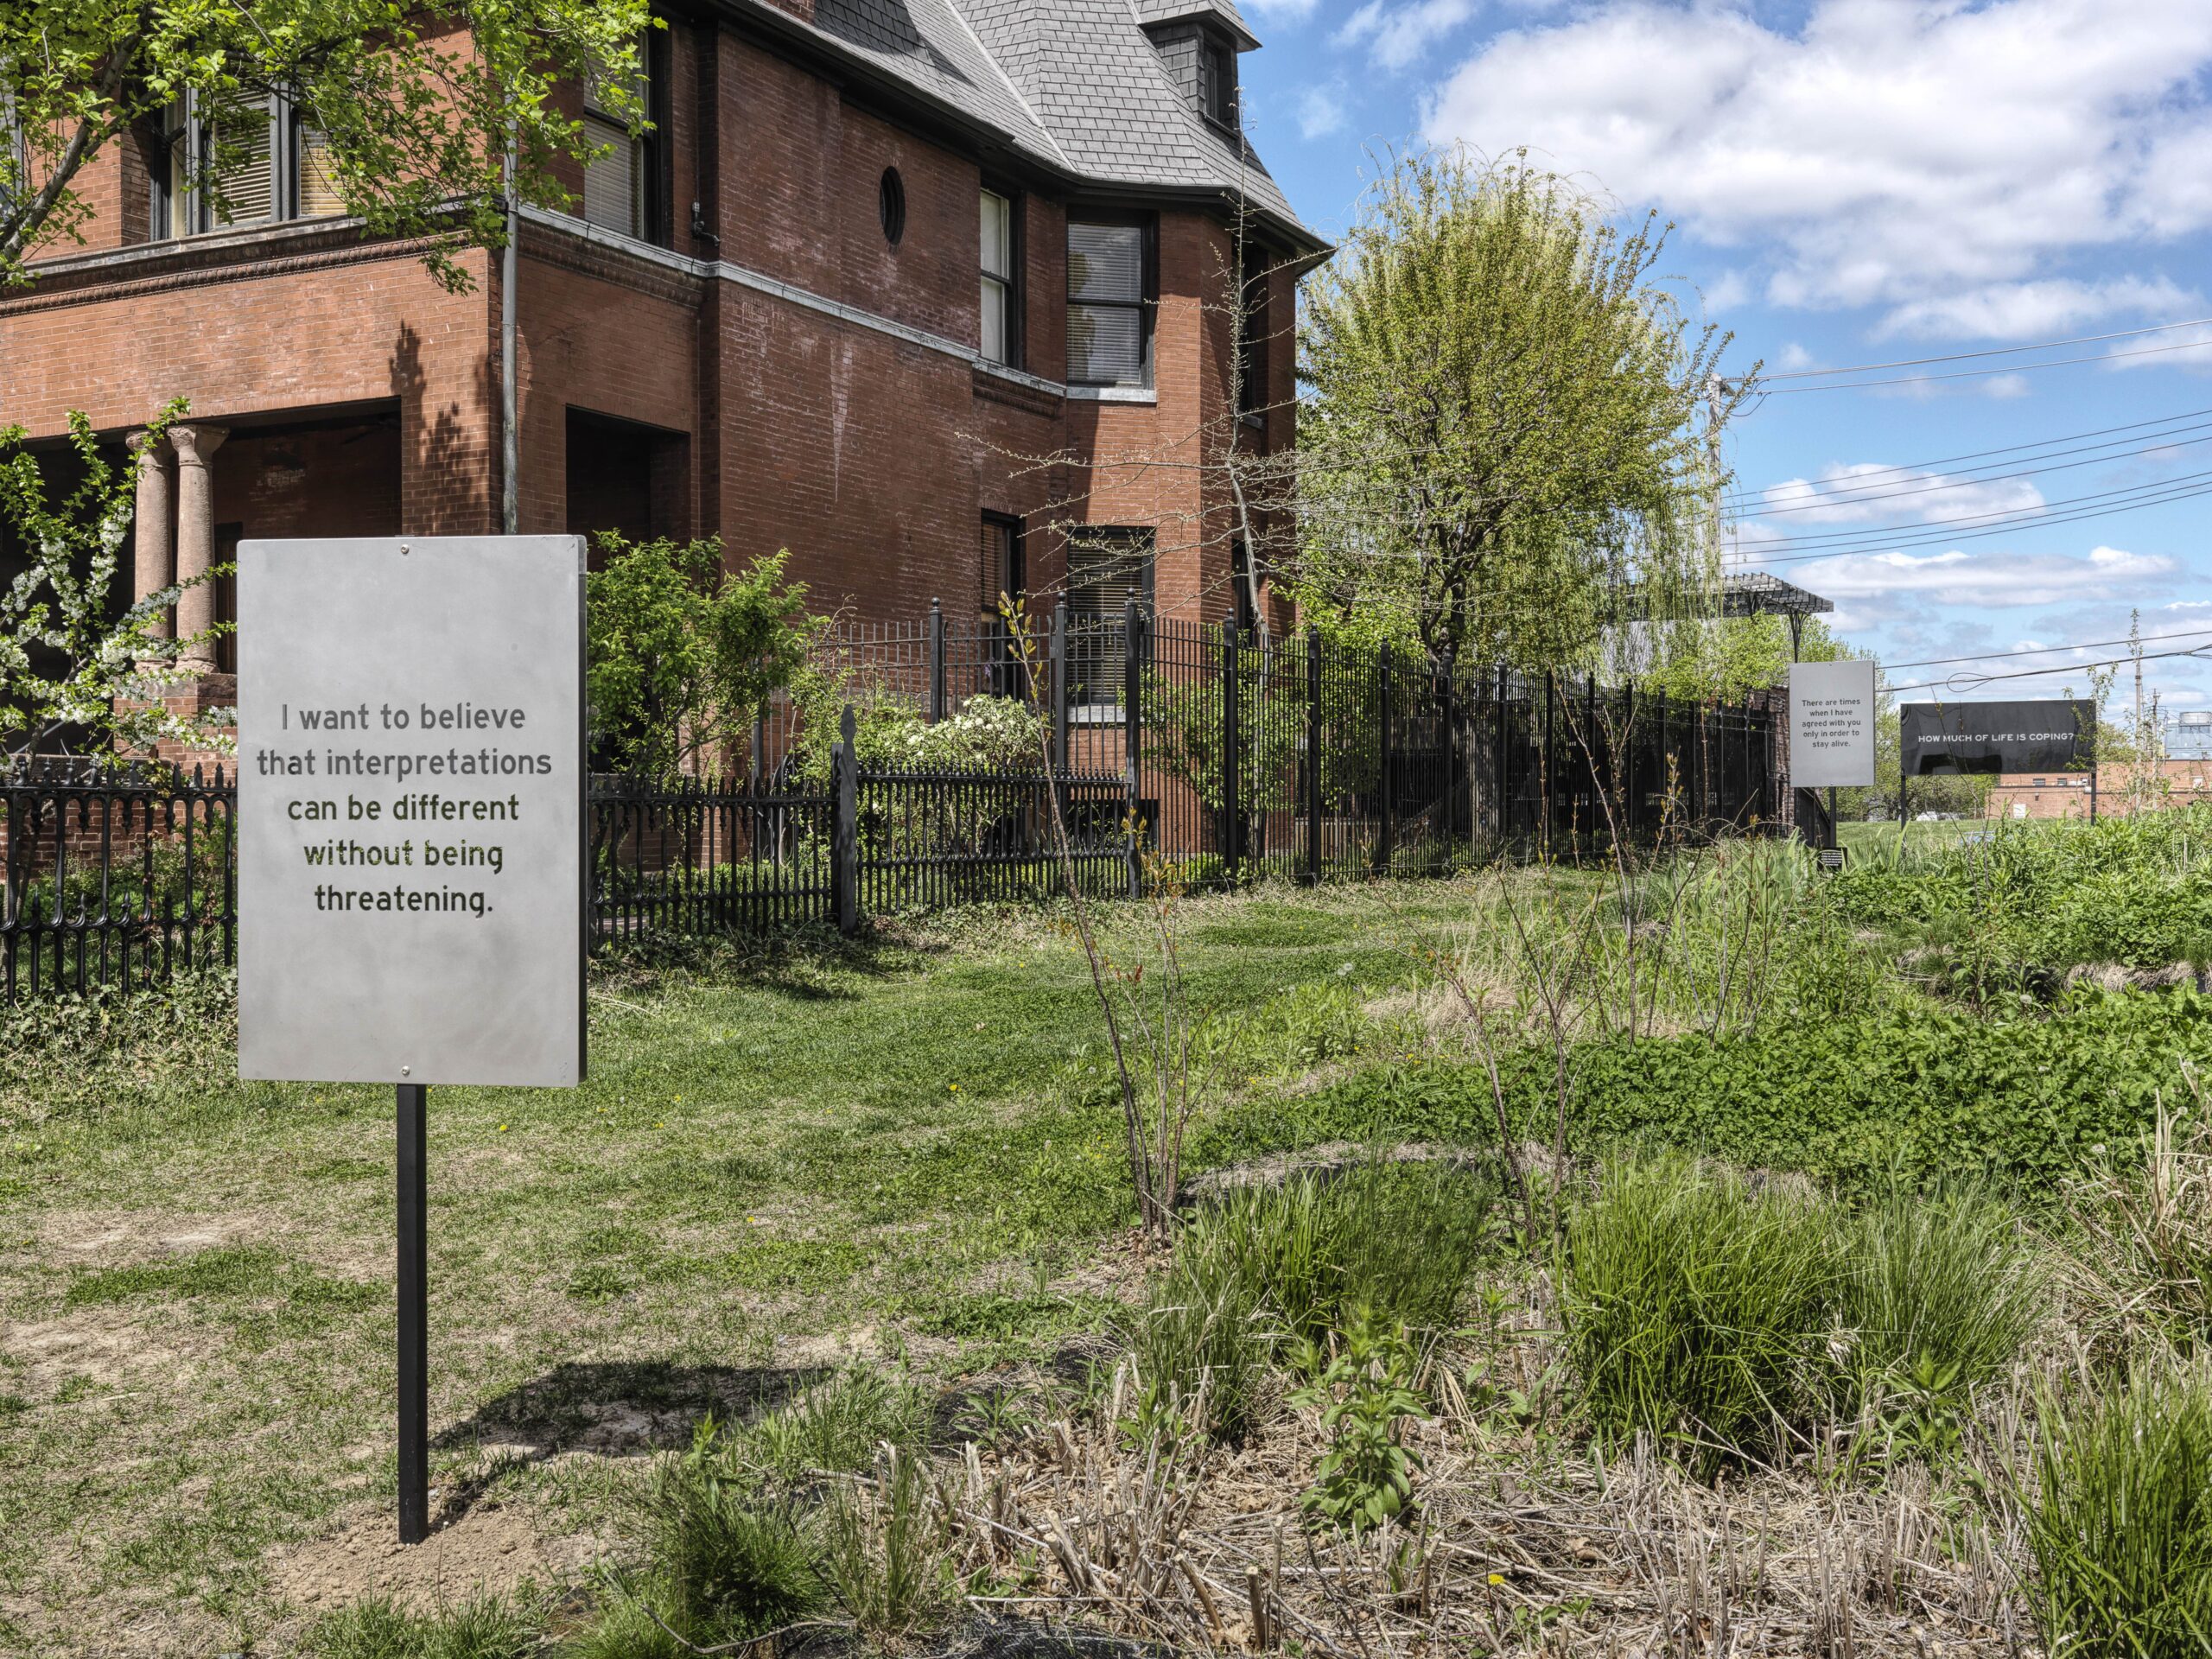 A metal sign in a field in front of a brick house reads "I want to believe that interpretations can be different without being threatening."